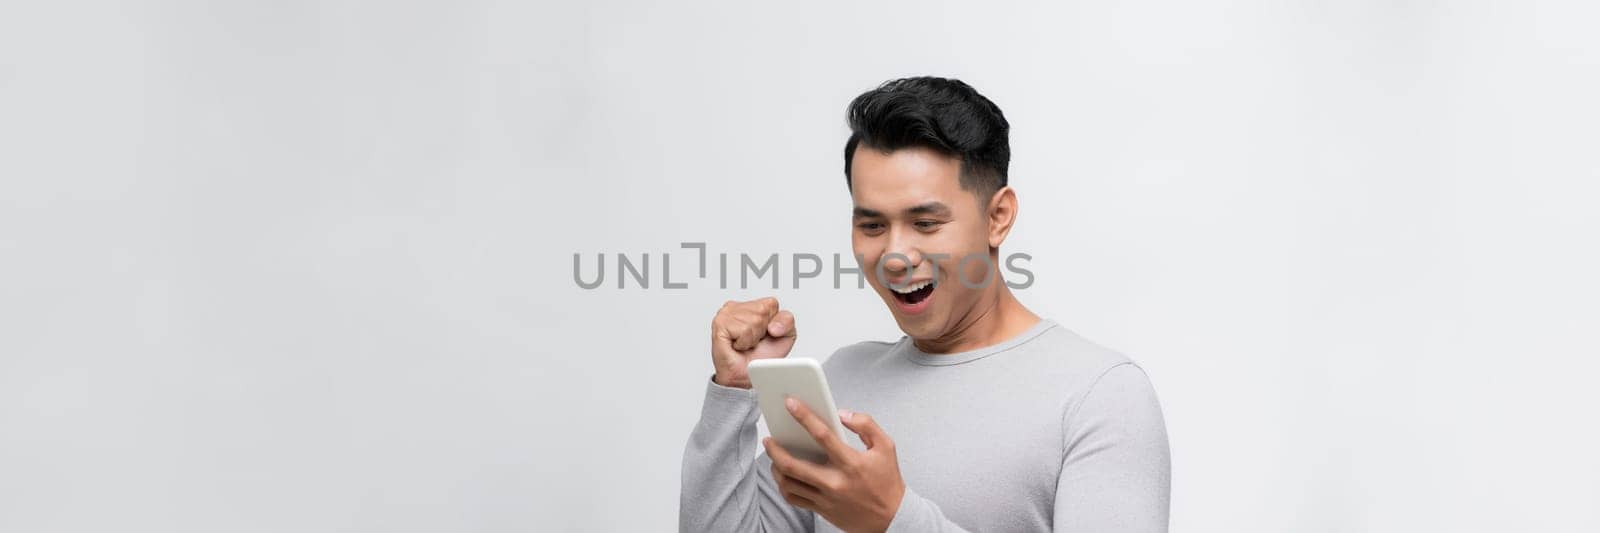 Happy winner! Young handsome man smiling holding tablet and playing games